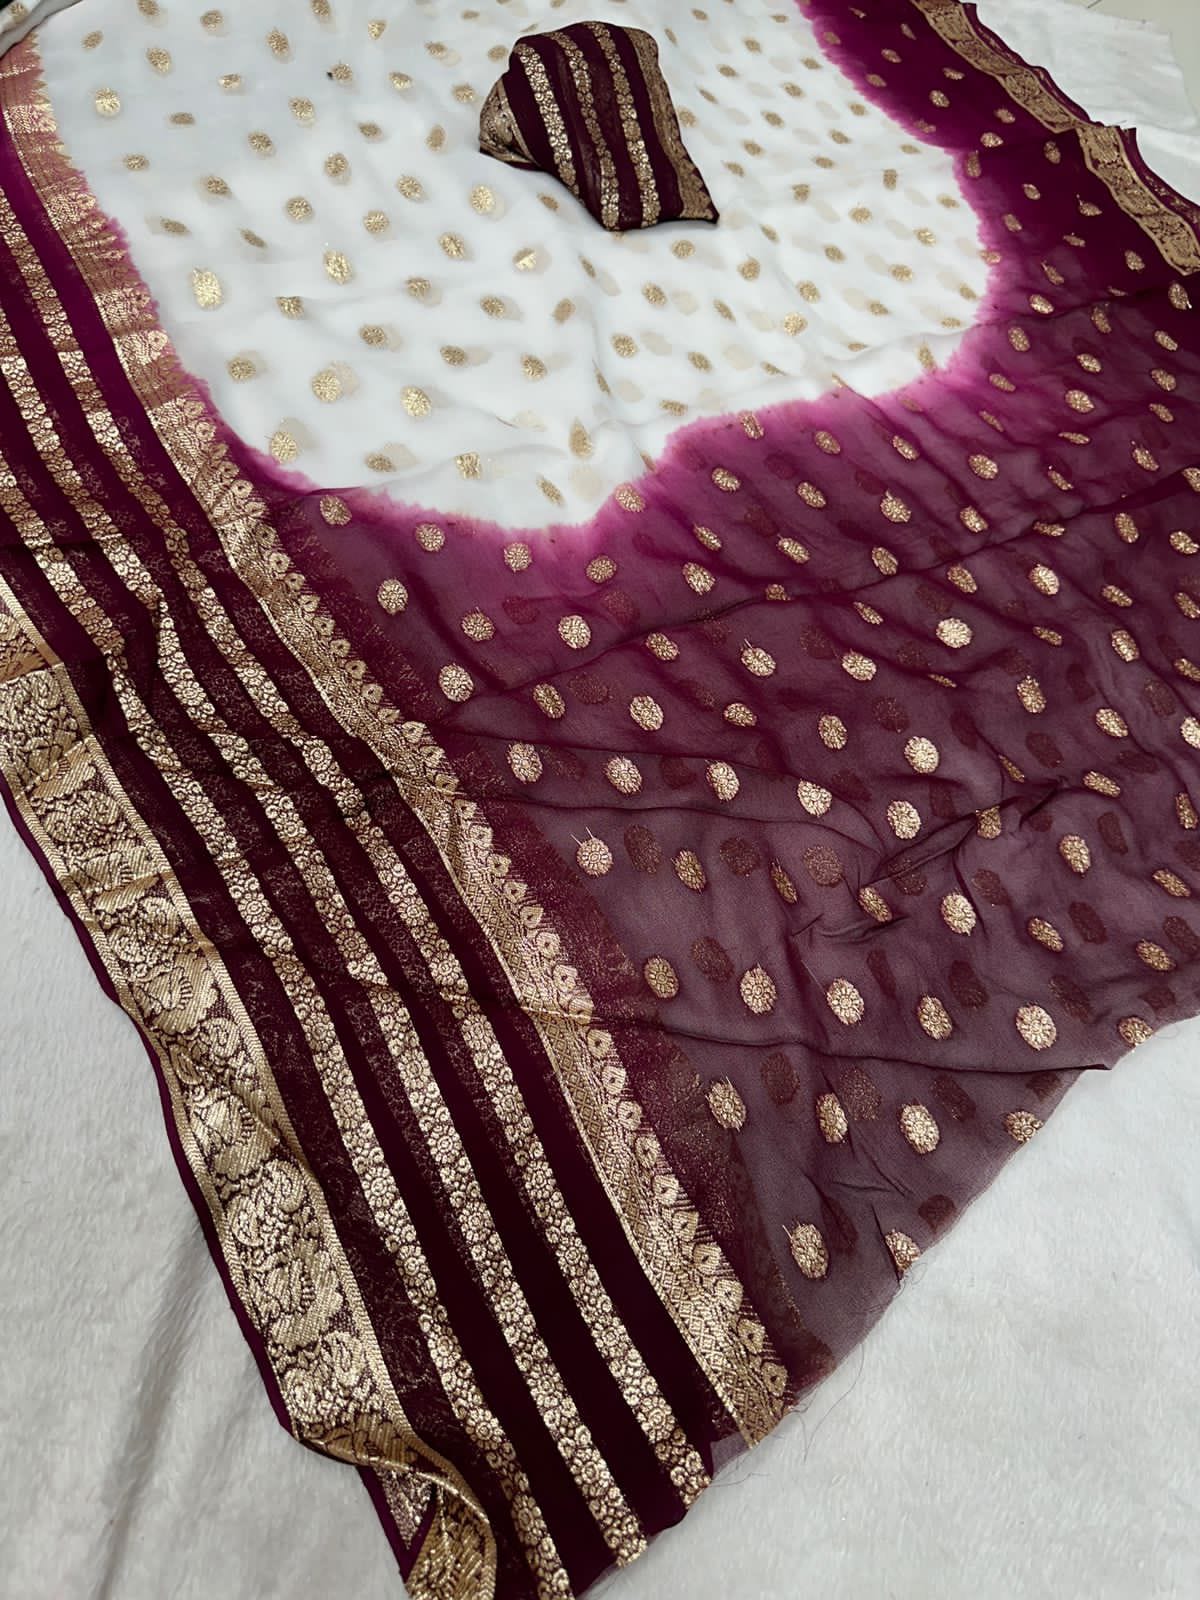 Viscose Georgette Jacquard Saree with Contrast Blouse & Pallu - Shaded Elegance